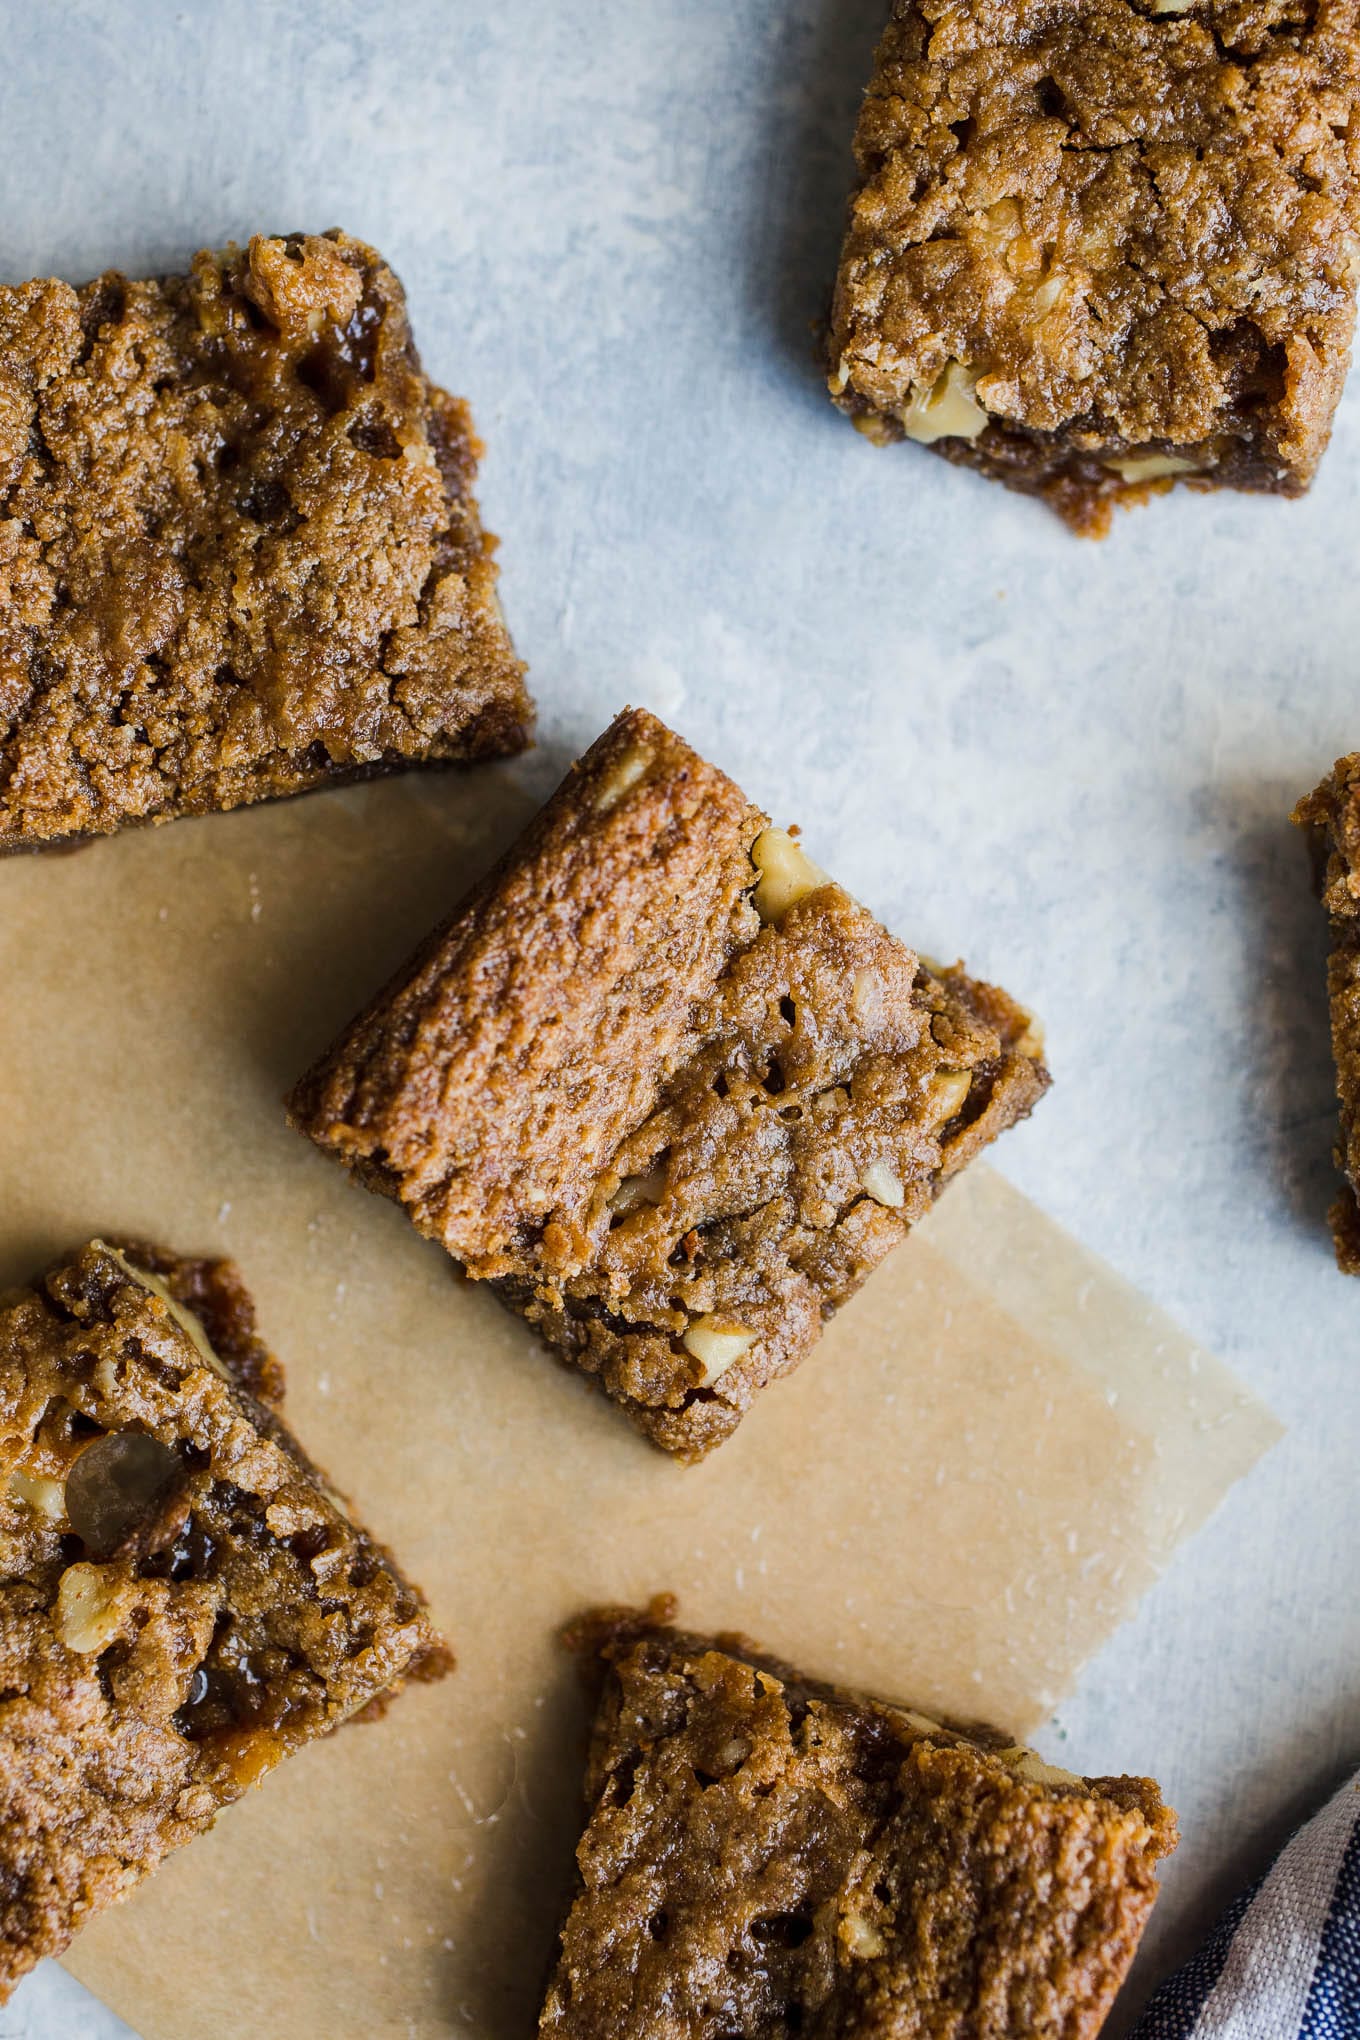 Gluten-Free Maple Walnut Blondies made with almond flour, sweet rice flour, almond butter, walnuts, and infused with maple syrup. A delicious flavor combination that makes for a chewy vegan blondie recipe.